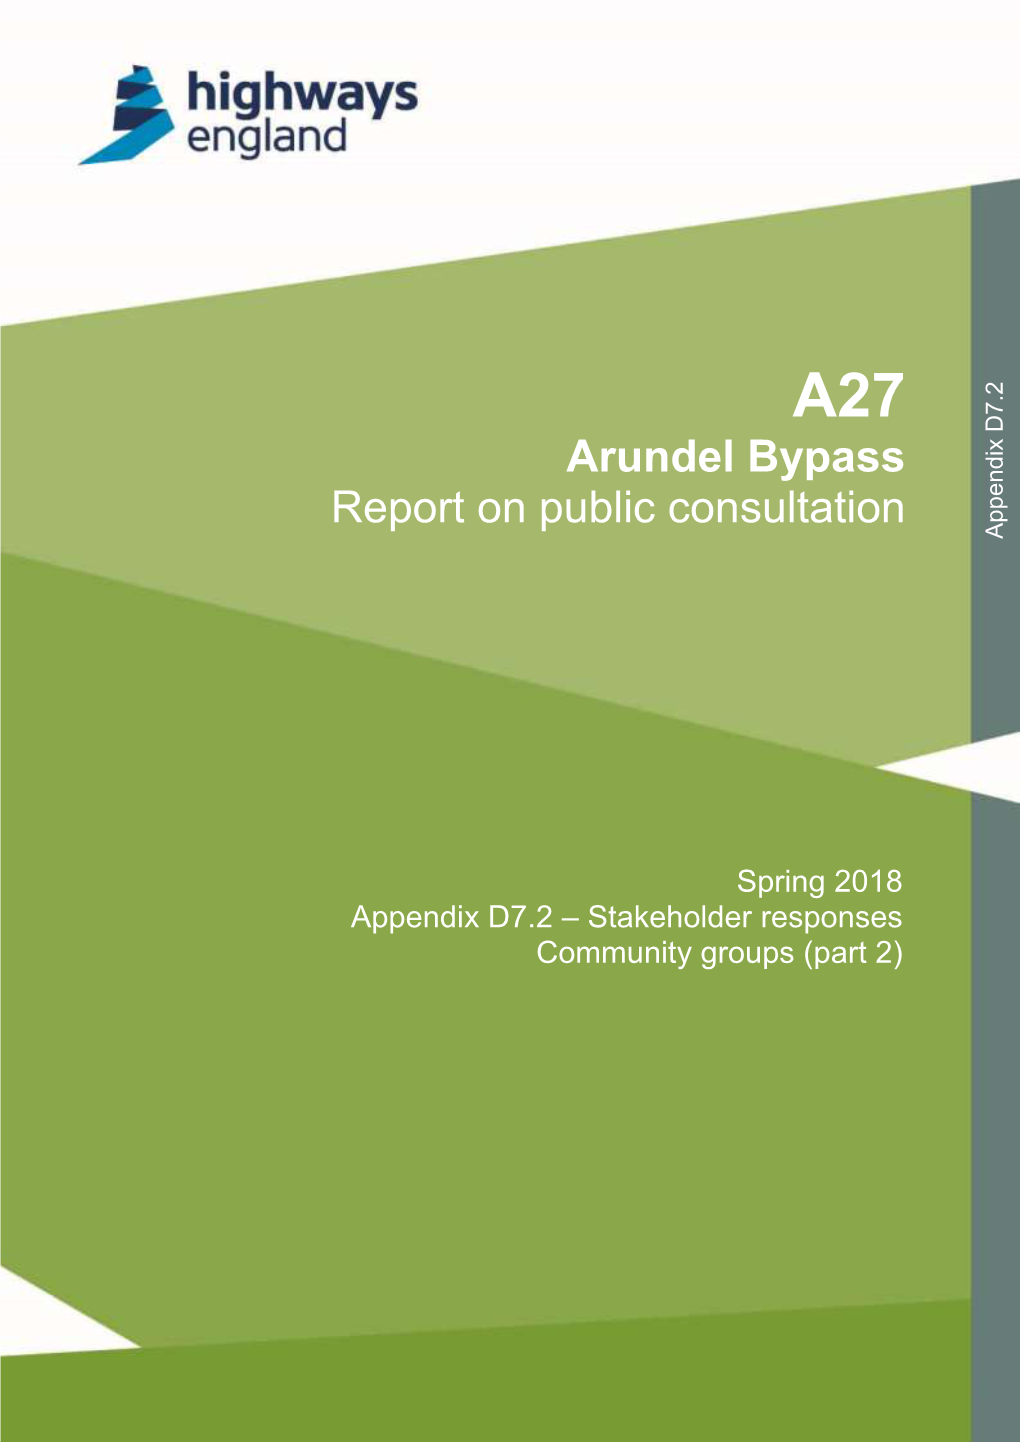 A27 Arundel Bypass Consultation Response